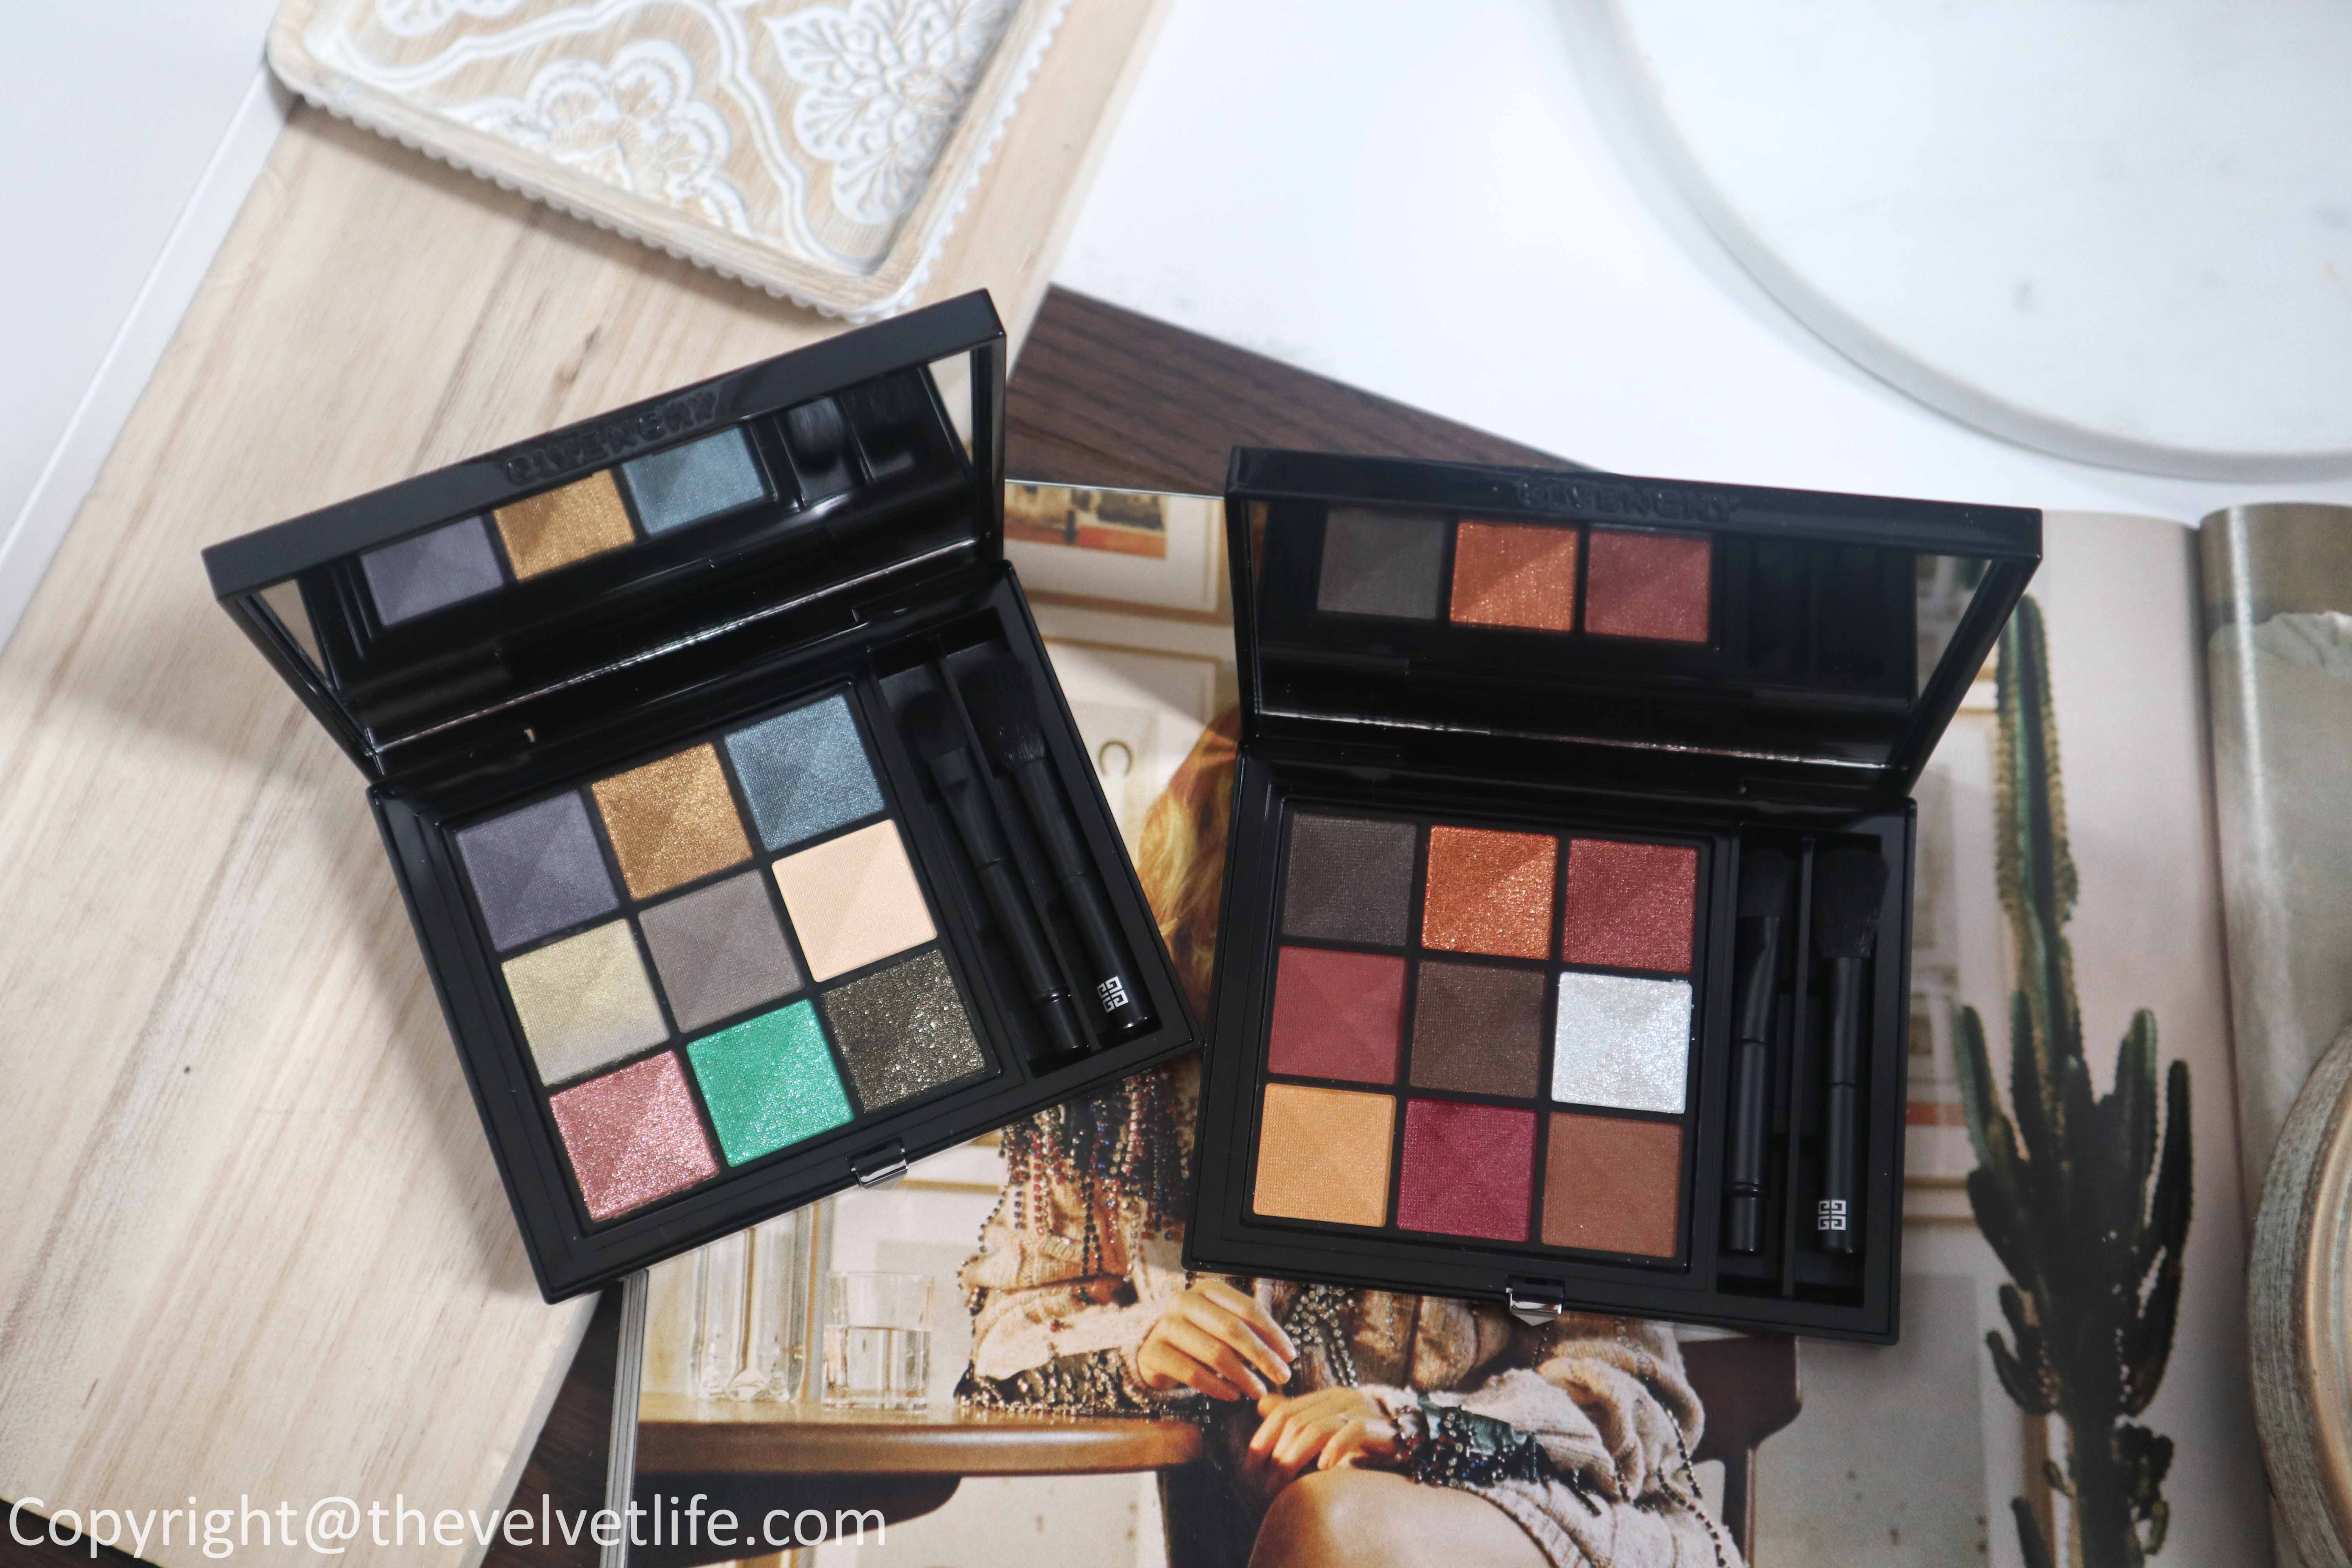 Givenchy Le 9 De Givenchy Eyeshadow Palette Review - The Velvet Life